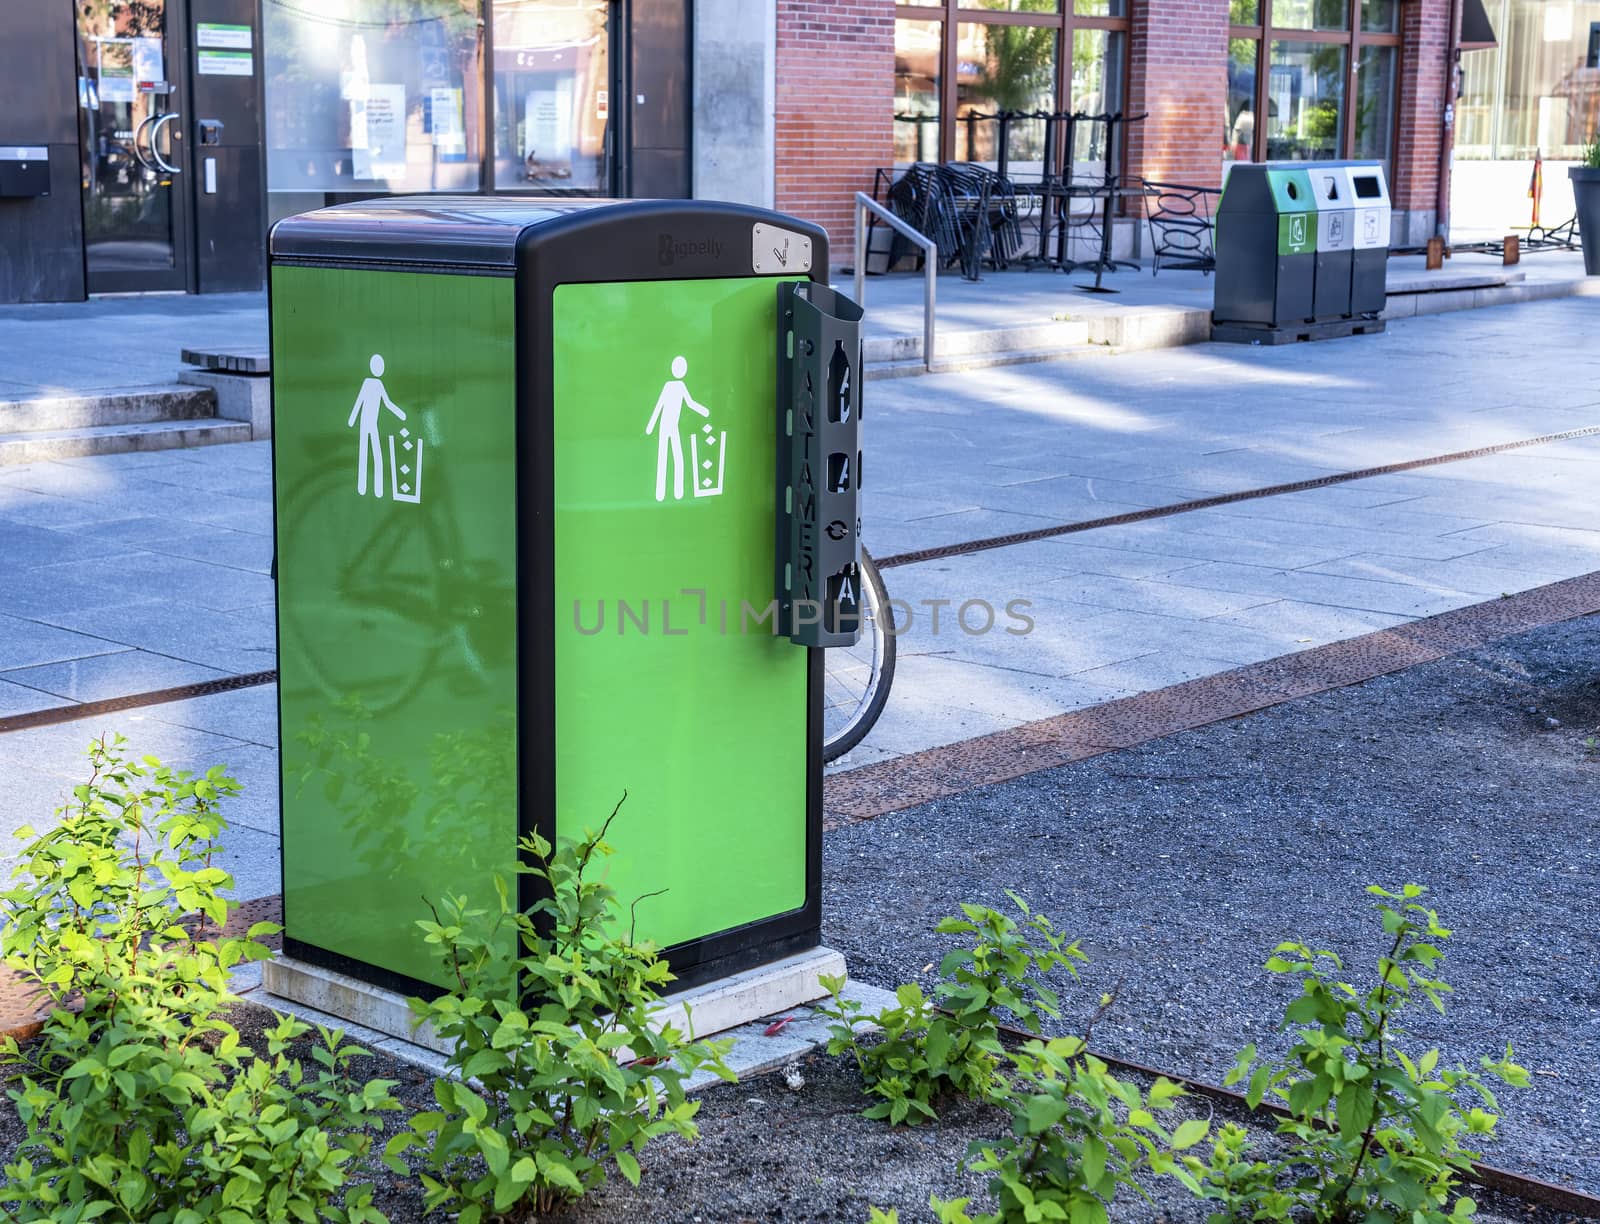 UMEA, SWEDEN - JUNE 10, 2020: Fresh nice looking green bin with black top, easy cans recycling for tourists and locals walking on street, summer time, central part of Umea city, Vasterbotten county